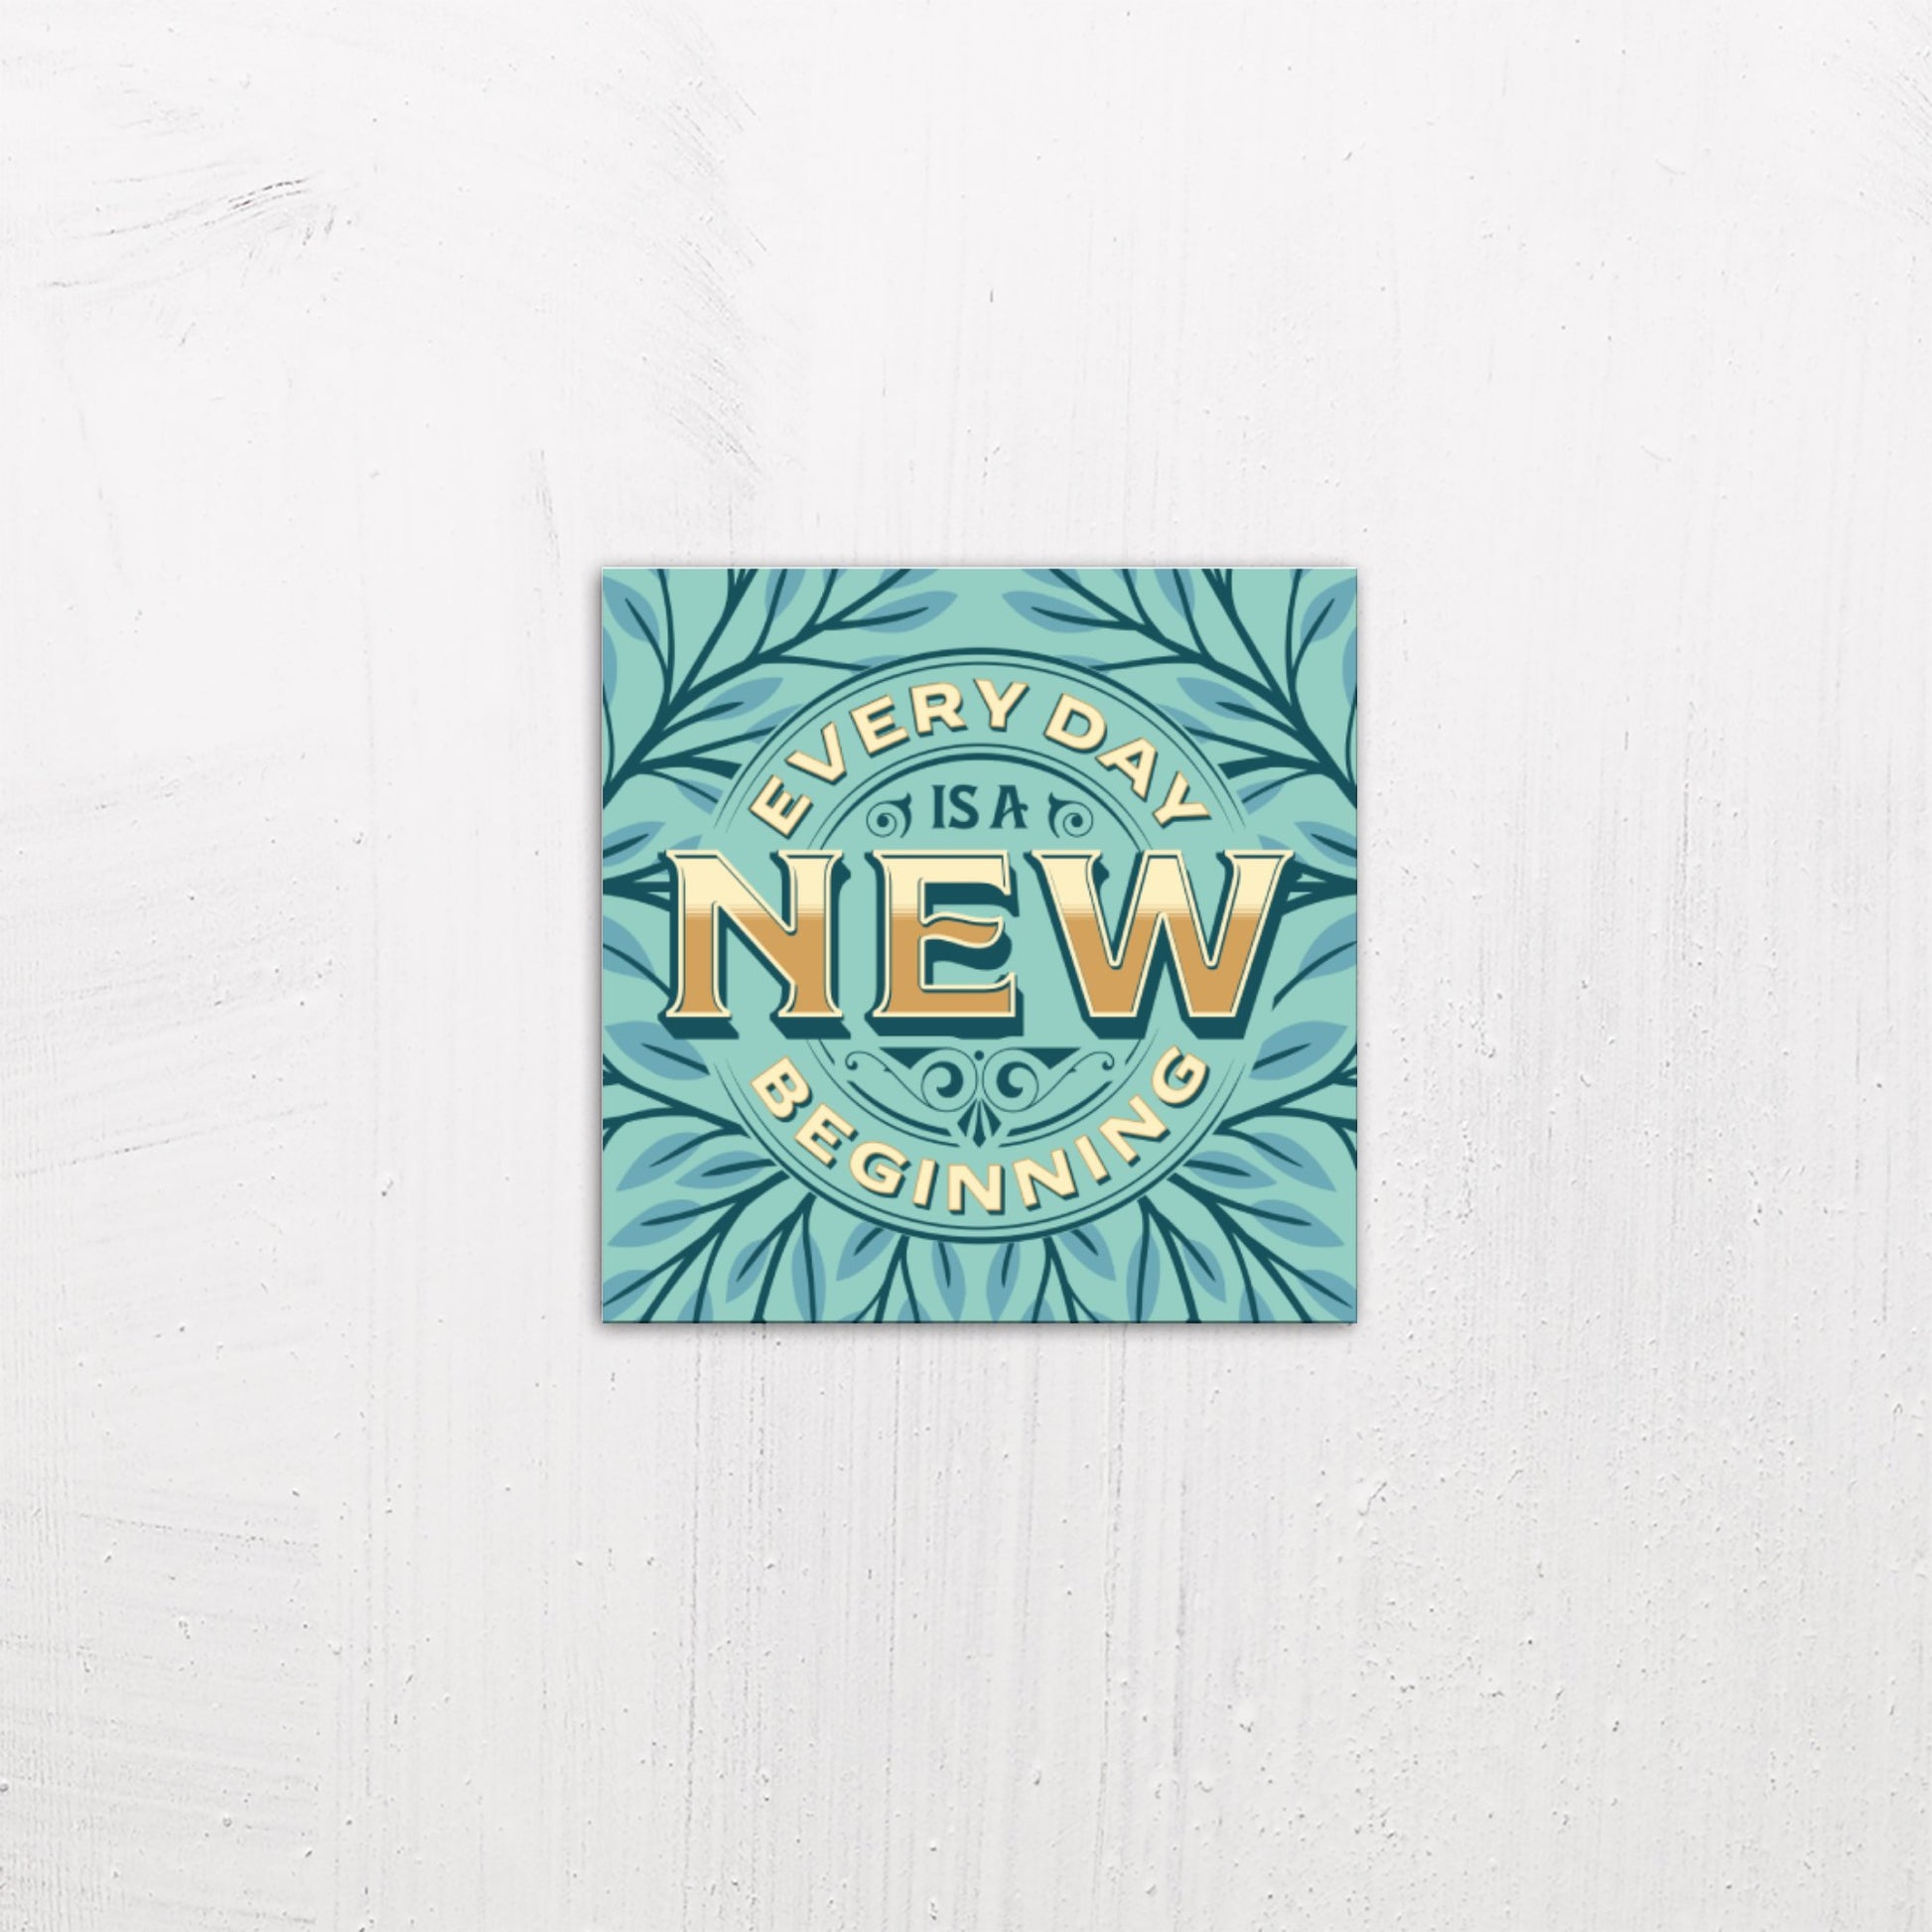 A small size metal art poster display plate with printed design of a Every Day is A New Beginning Quote